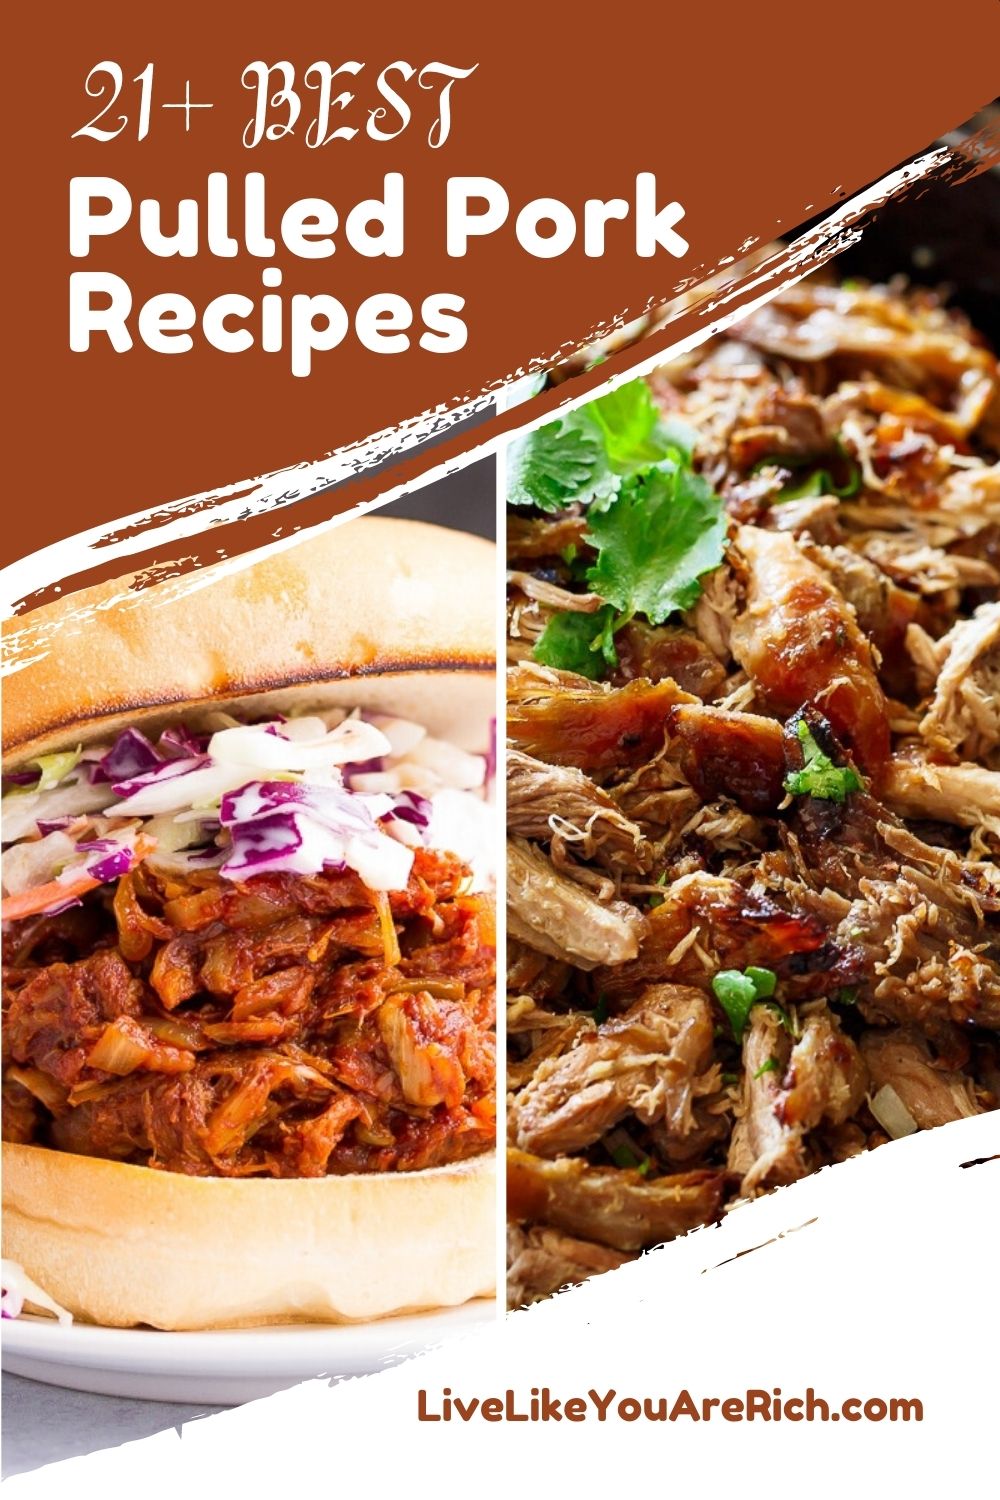 My family often has leftovers from our fall-part-tender smoked pulled pork recipe. I’ve rounded up 21+ delicious pulled pork recipes and decided to share them with you as well. 